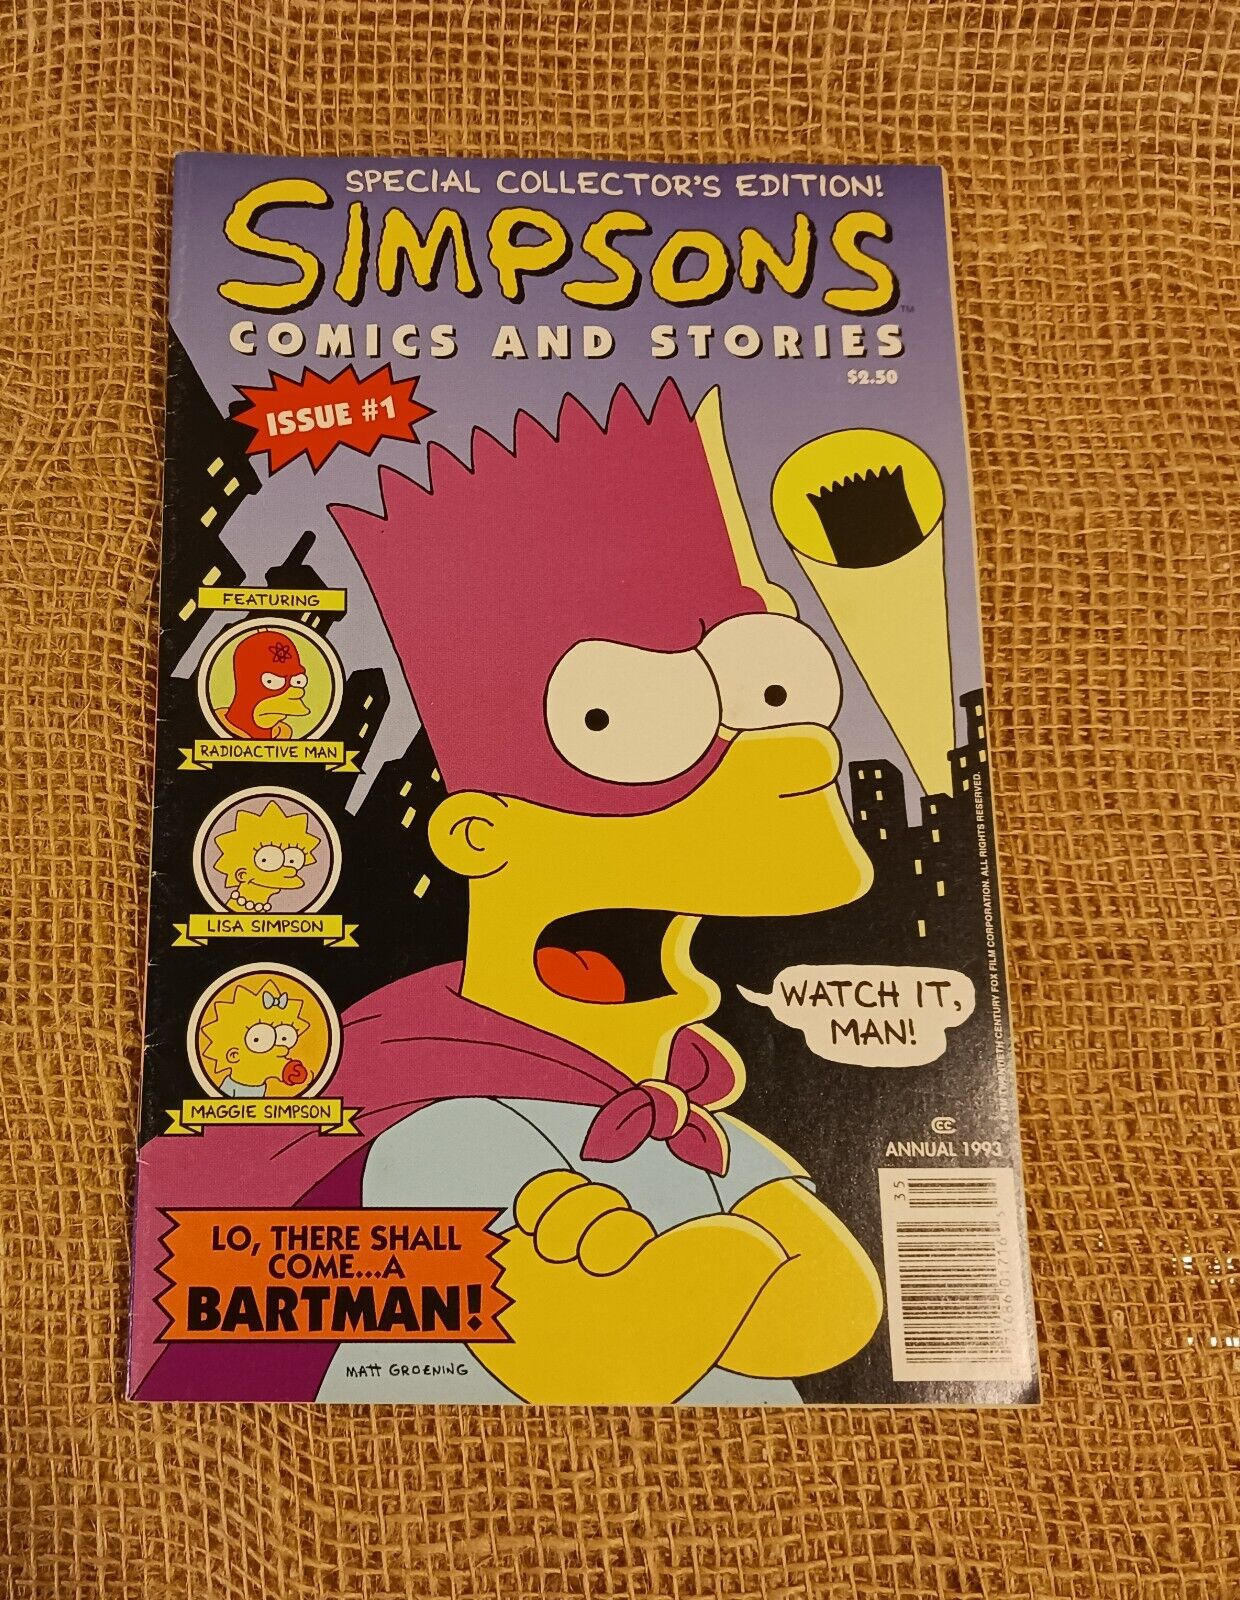 SIMPSONS COMICS AND STORIES #1 1993 1st COMIC APPEARANCE